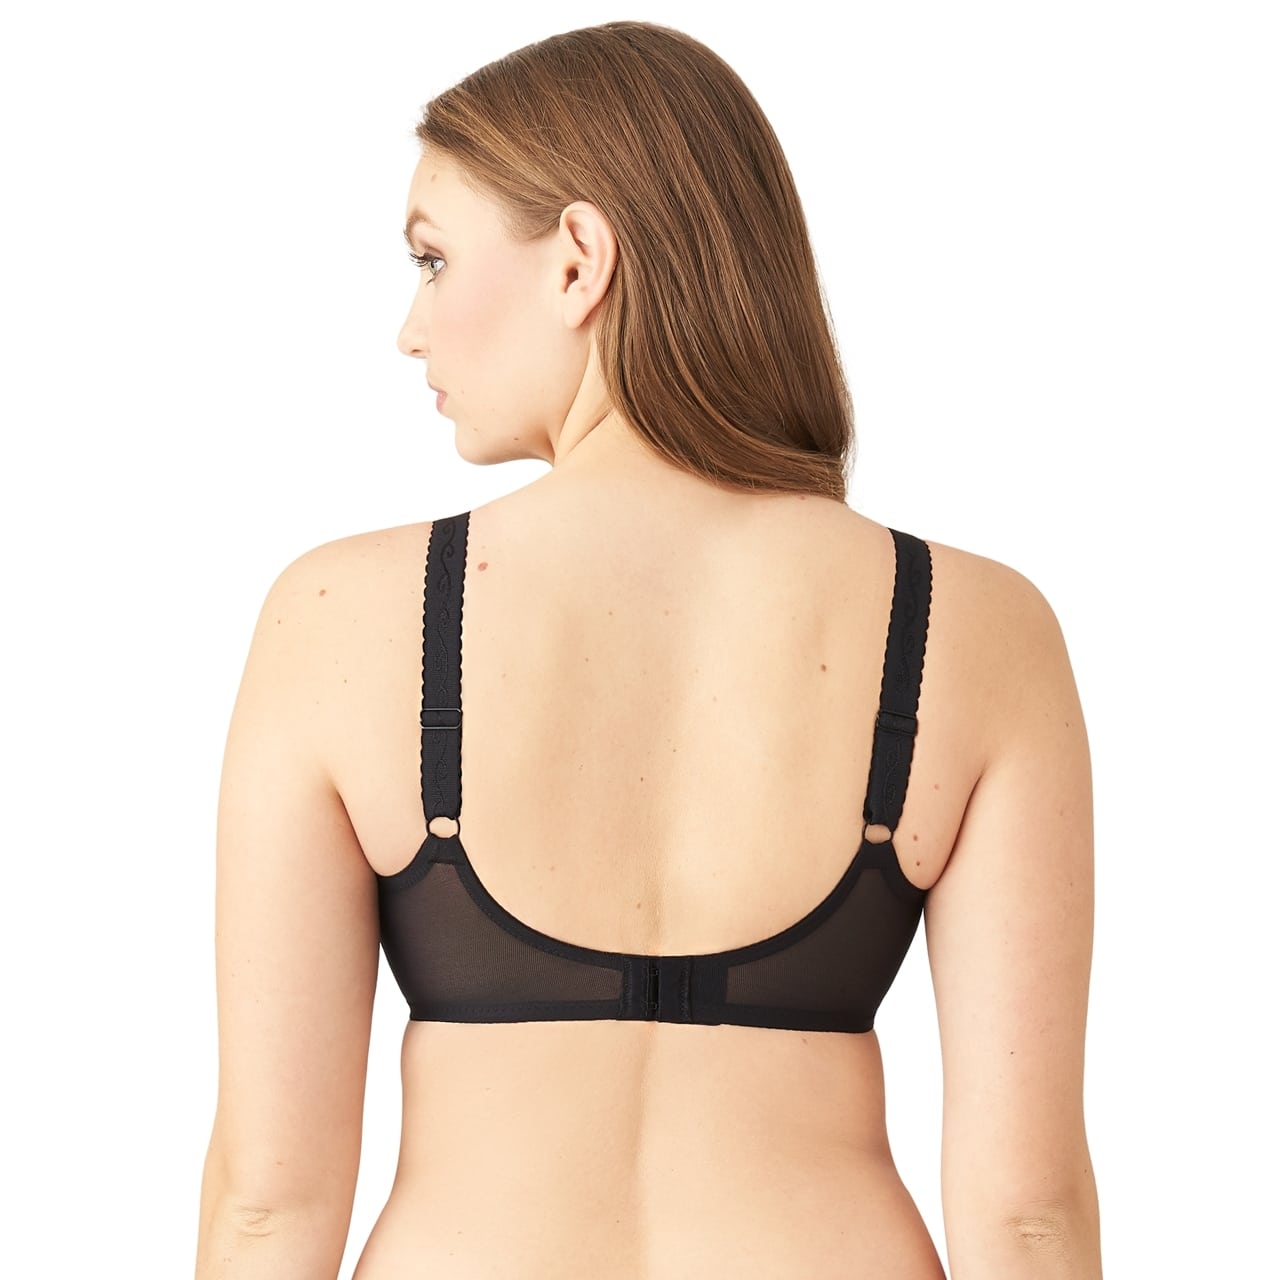 Wacoal USA Simple Shaping Full Coverage Underwire Minimizer Bra 857109